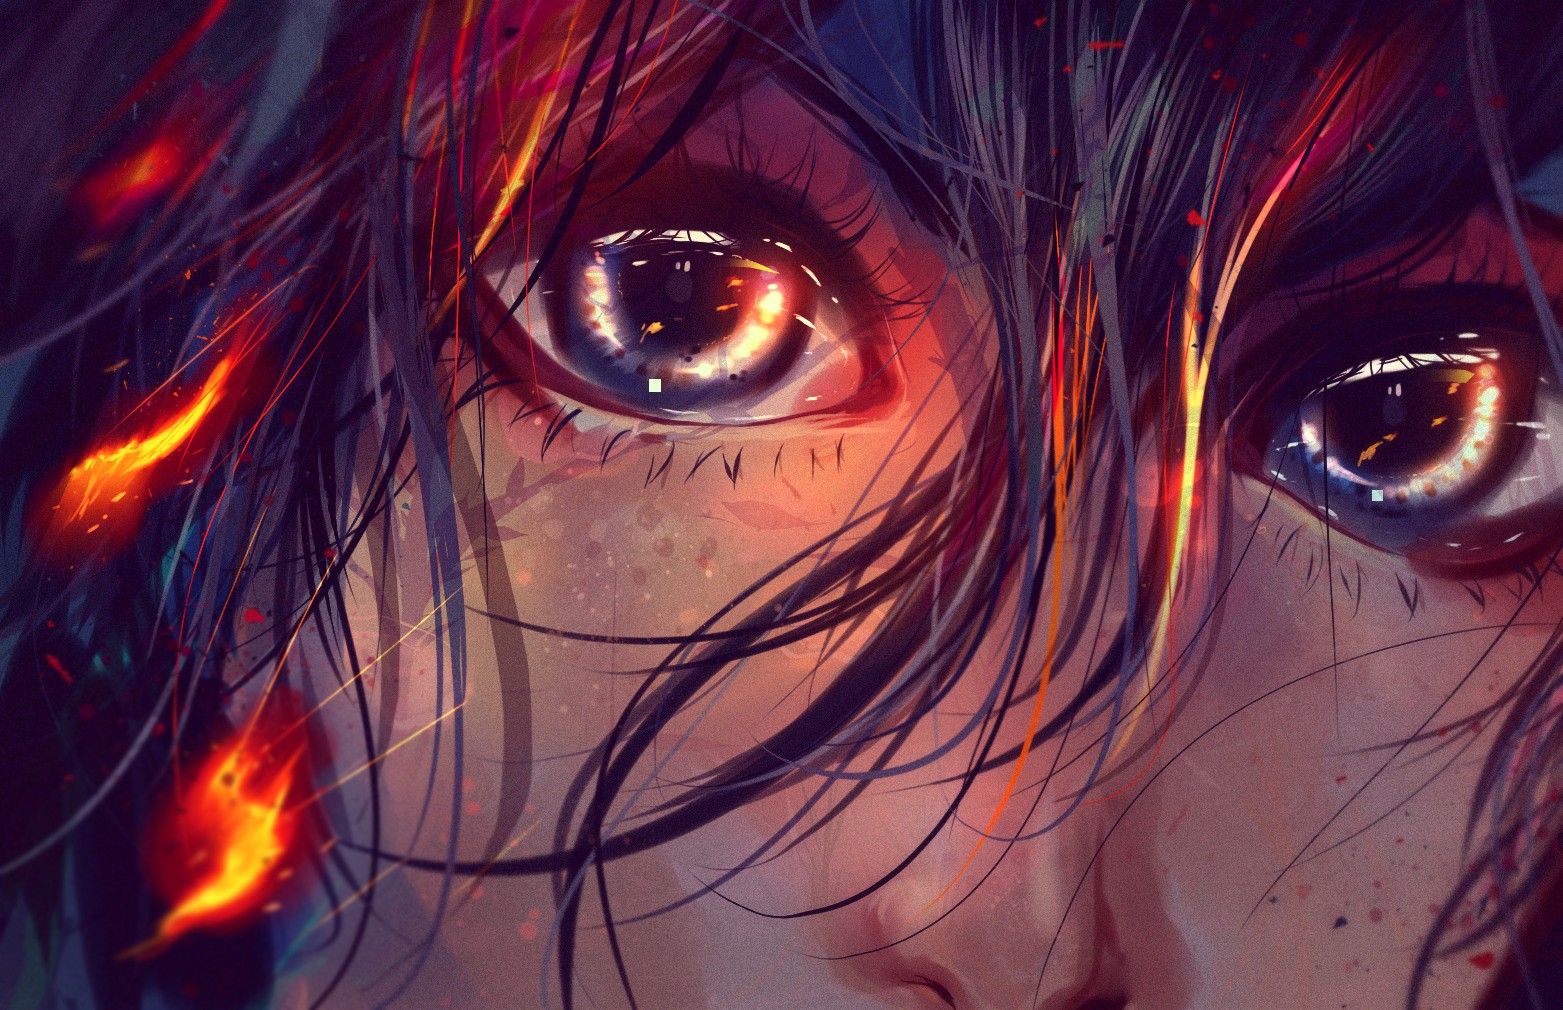 Wallpaper, drawing, illustration, portrait, anime, fire, Hit Girl, color, darkness, screenshot, computer wallpaper, fictional character, organ, special effects 1563x1010